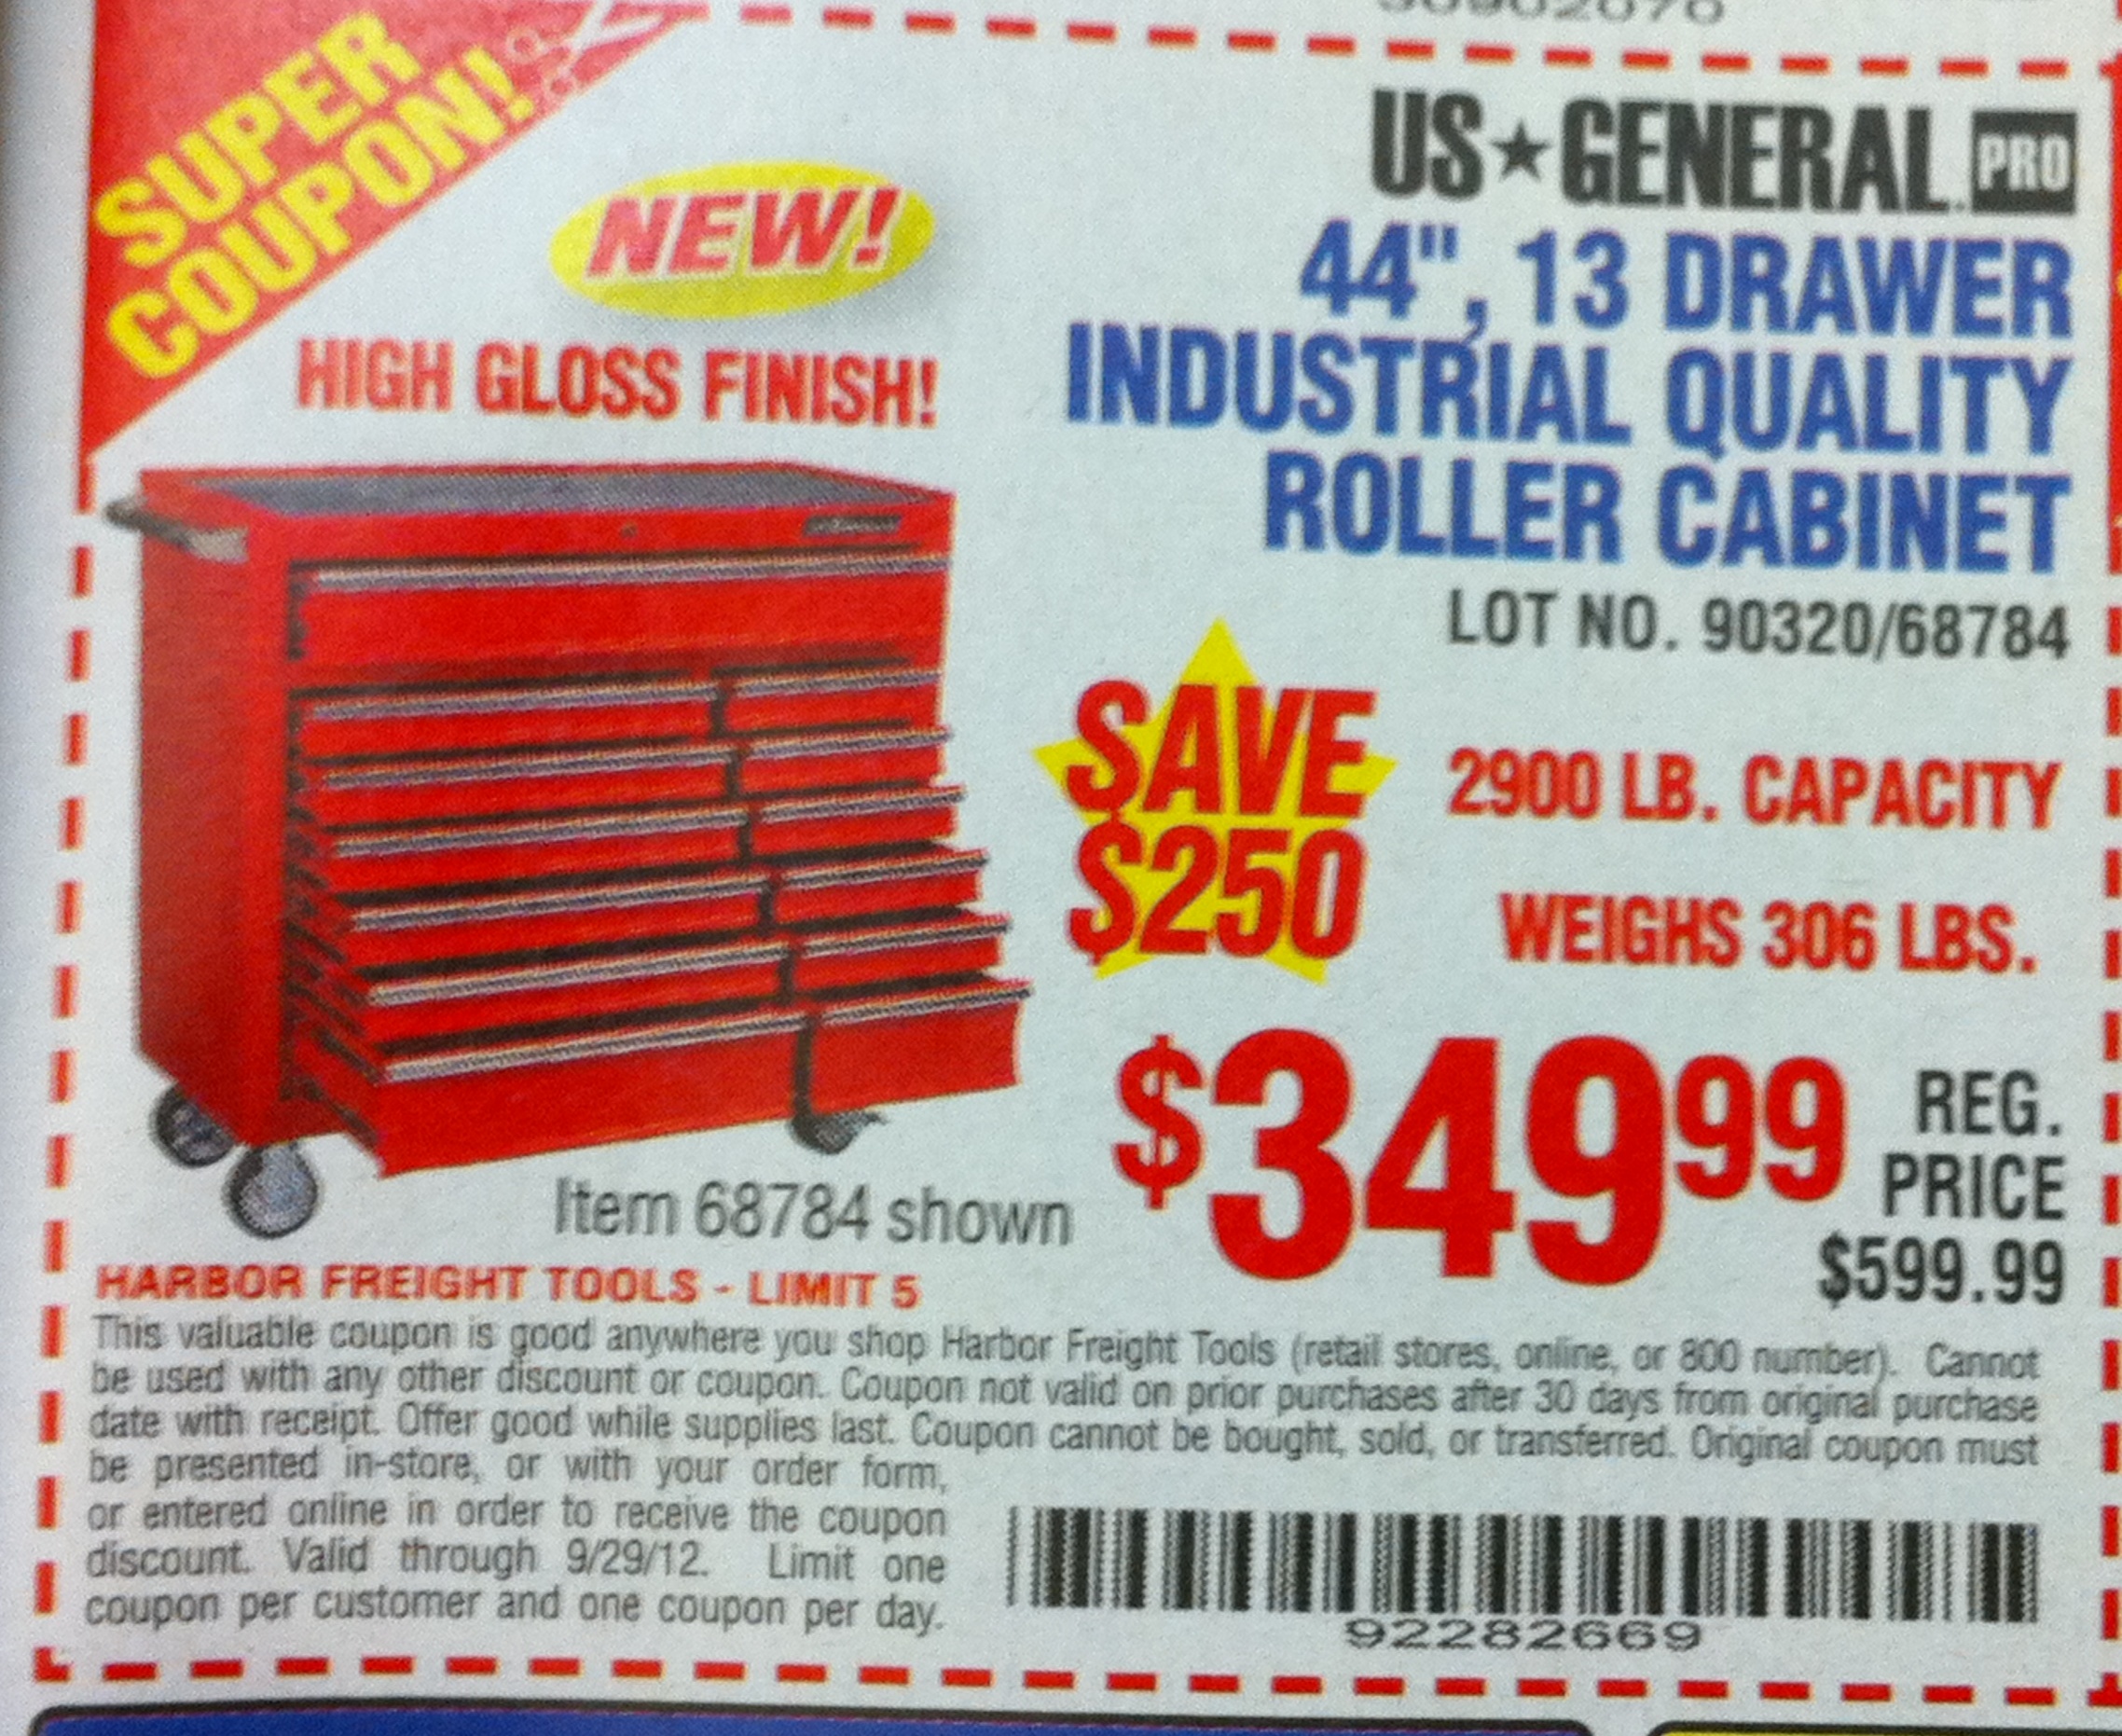 Harbor Freight Coupon Thread Page 232 Slickdeals Net